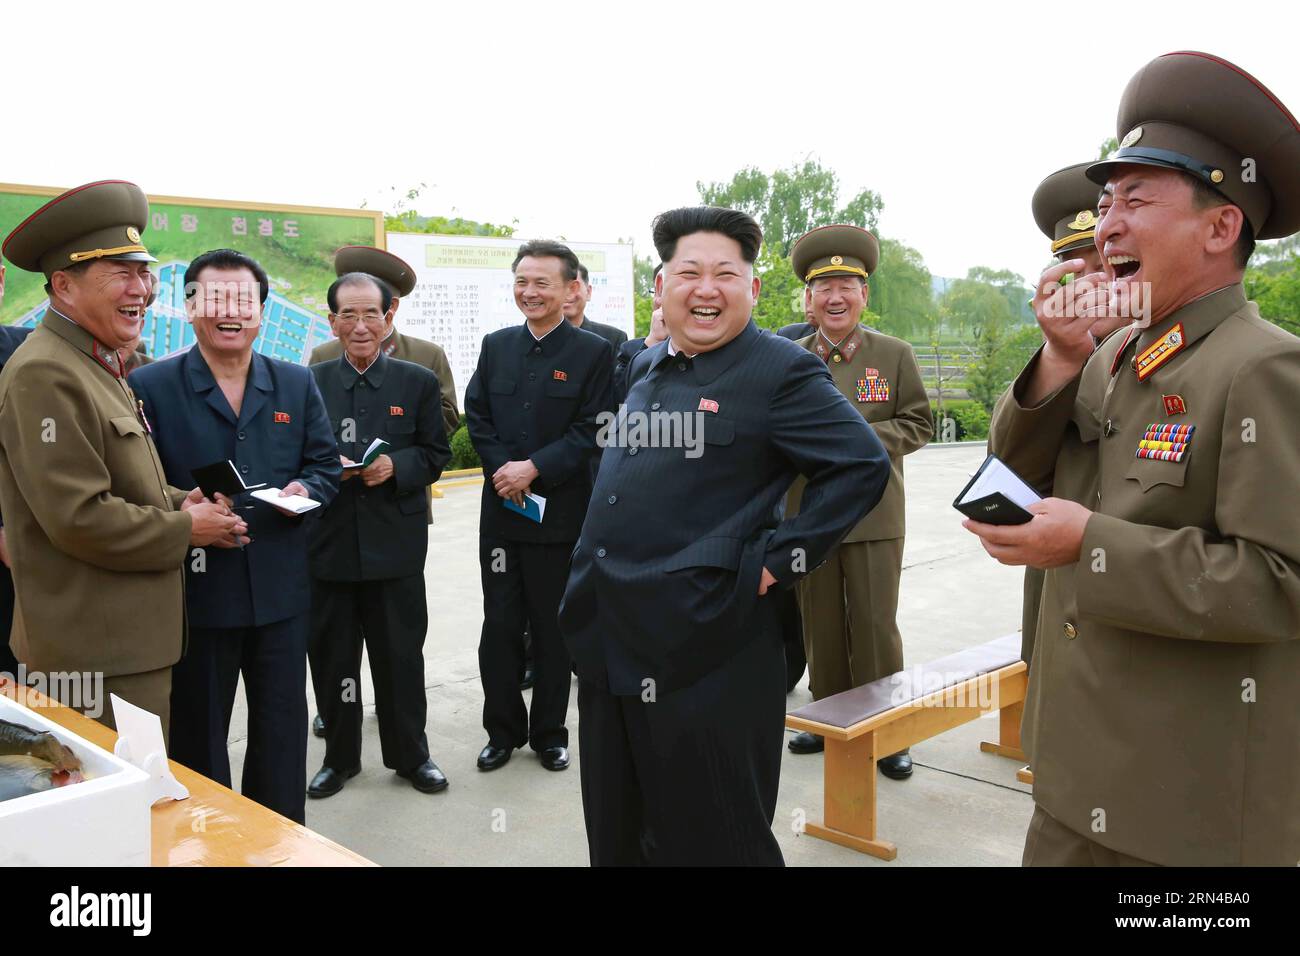 (150515) -- PYONGYANG, May 15, 2015 -- Photo provided by Korean Central News Agency () on May 15, 2015 shows top leader of the Democratic People s Republic of Korea (DPRK) Kim Jong Un (C) recently inspecting Sinchang fish farm under Unit 810 of the Korean People s Army (KPA). ) DPRK-KIM JONG UN-SINCHANG FISH FARM-INSPECTION KCNA PUBLICATIONxNOTxINxCHN   Pyongyang May 15 2015 Photo provided by Korean Central News Agency ON May 15 2015 Shows Top Leader of The Democratic Celebrities S Republic of Korea DPRK Kim Jong UN C Recently inspecting  Fish Farm Under Unit 810 of The Korean Celebrities S Ar Stock Photo